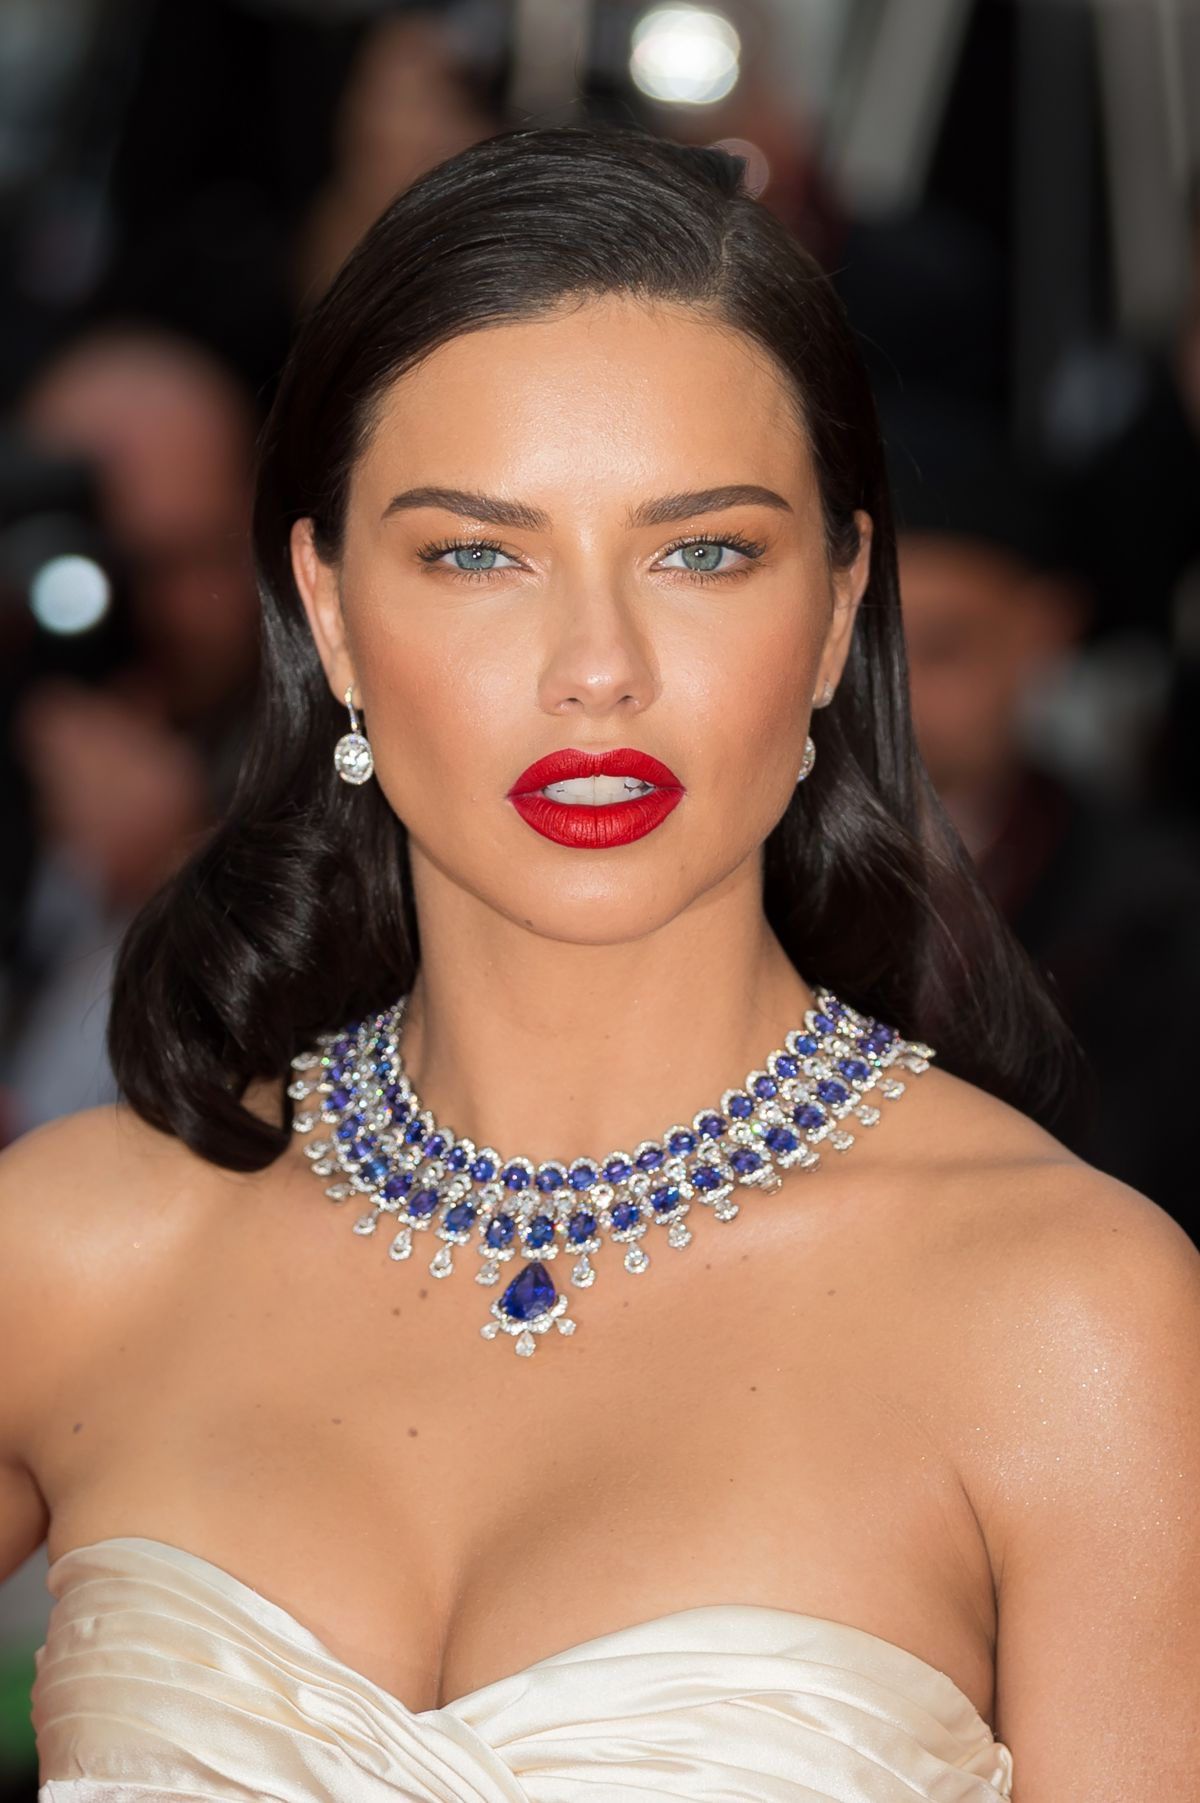 adriana-lima-at-burning-premiere-at-71st-annual-cannes-film-festival-05-16-2018-9.jpg